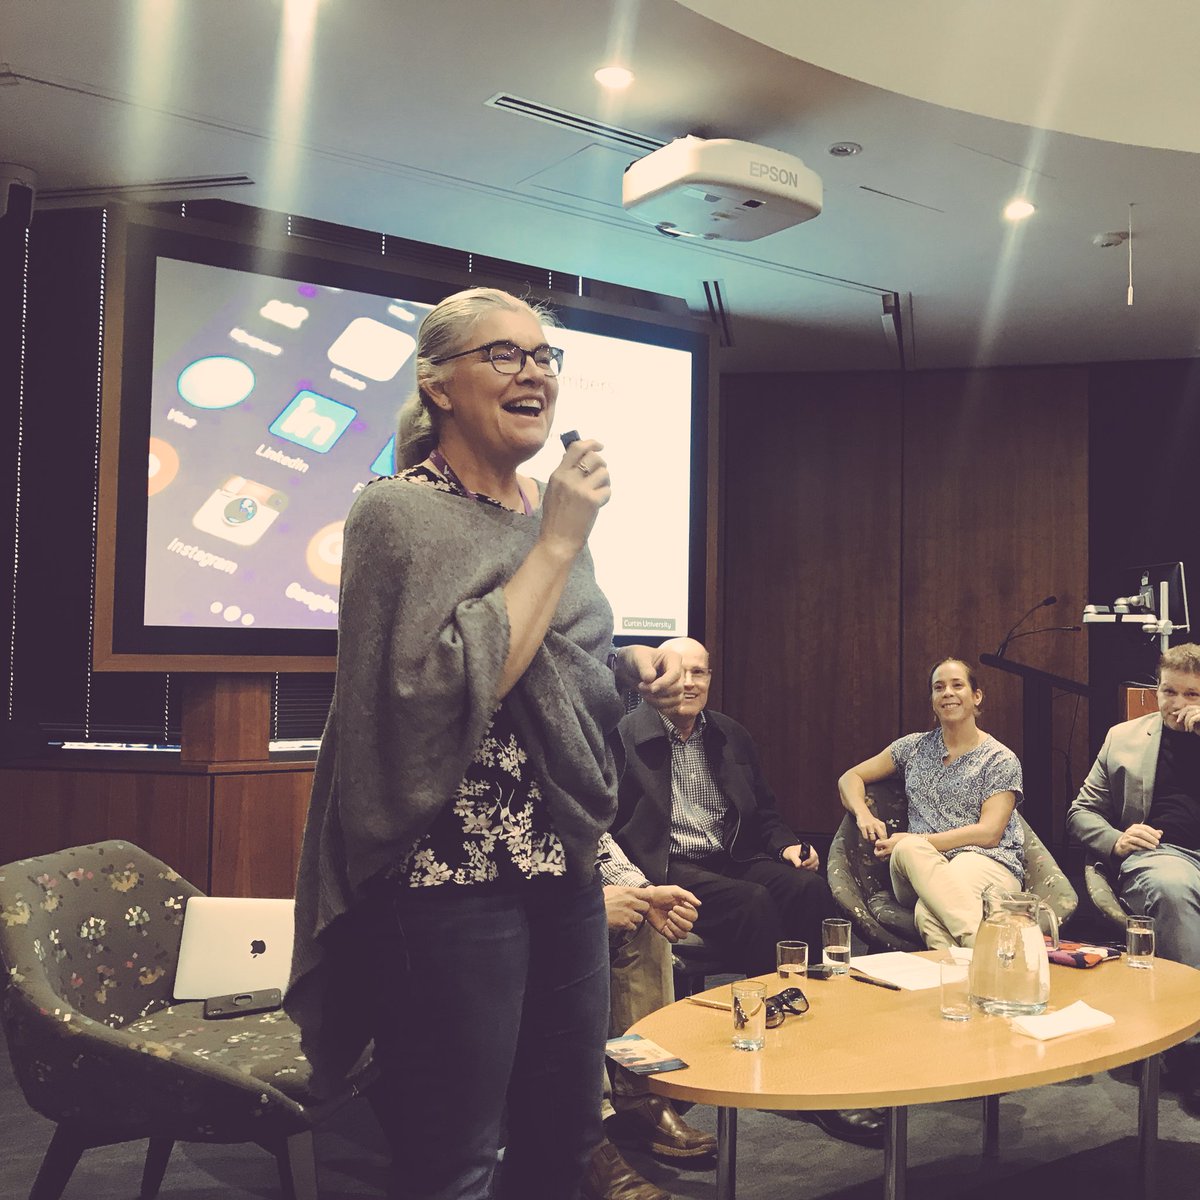 Our Space Rock superstar A/Prof Gretchen Benedix sharing how she values engagement and impact outside research for @CurtinLibrary #CurtinConversations.